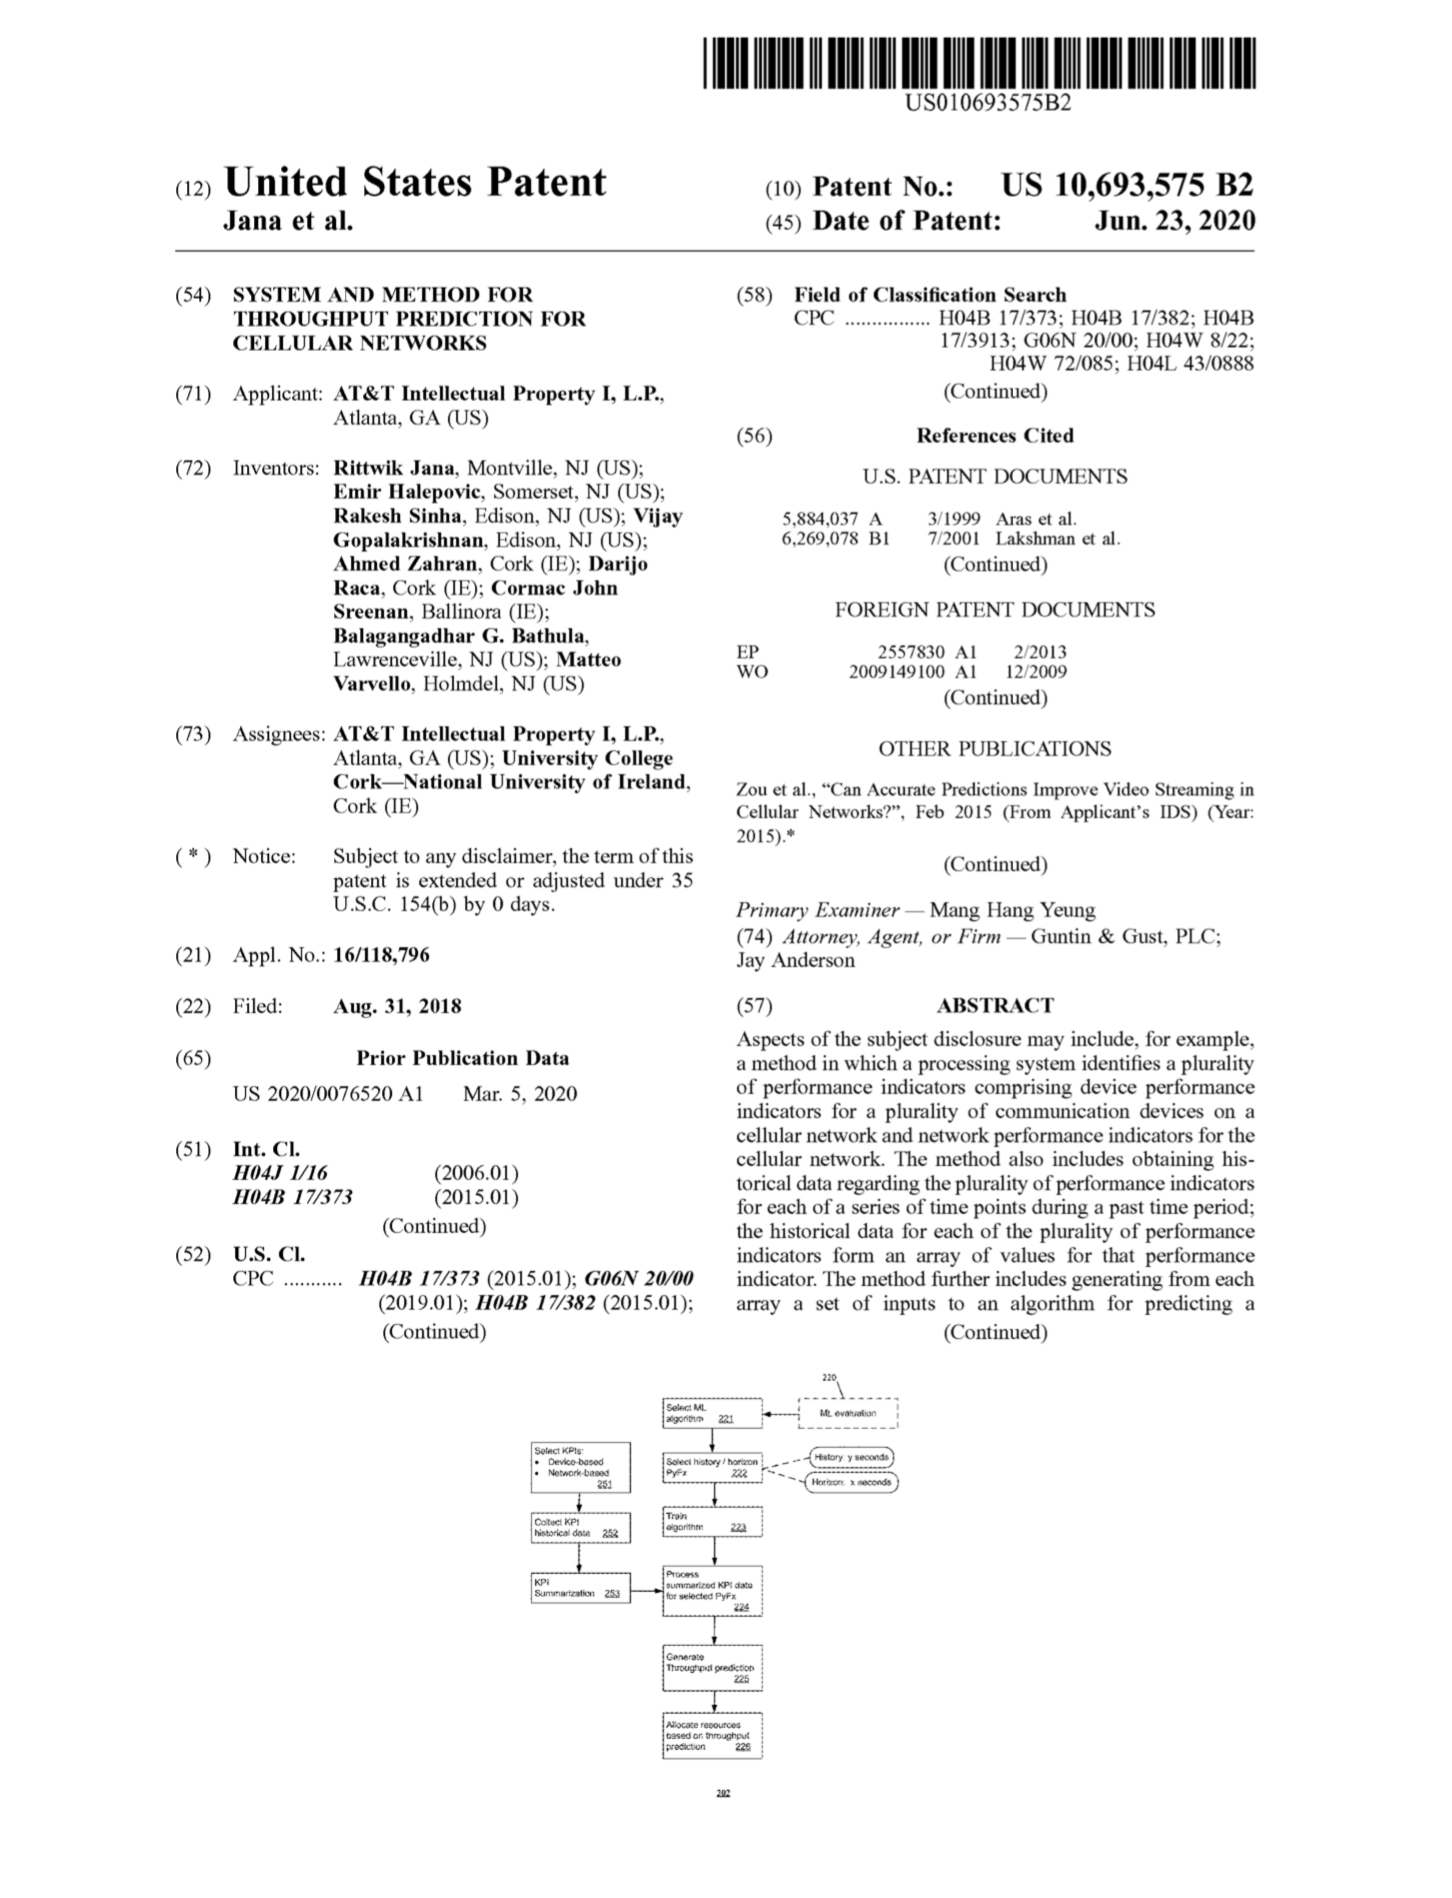 US Patent - System & Method for Throughput Prediction for Cellular Networks 